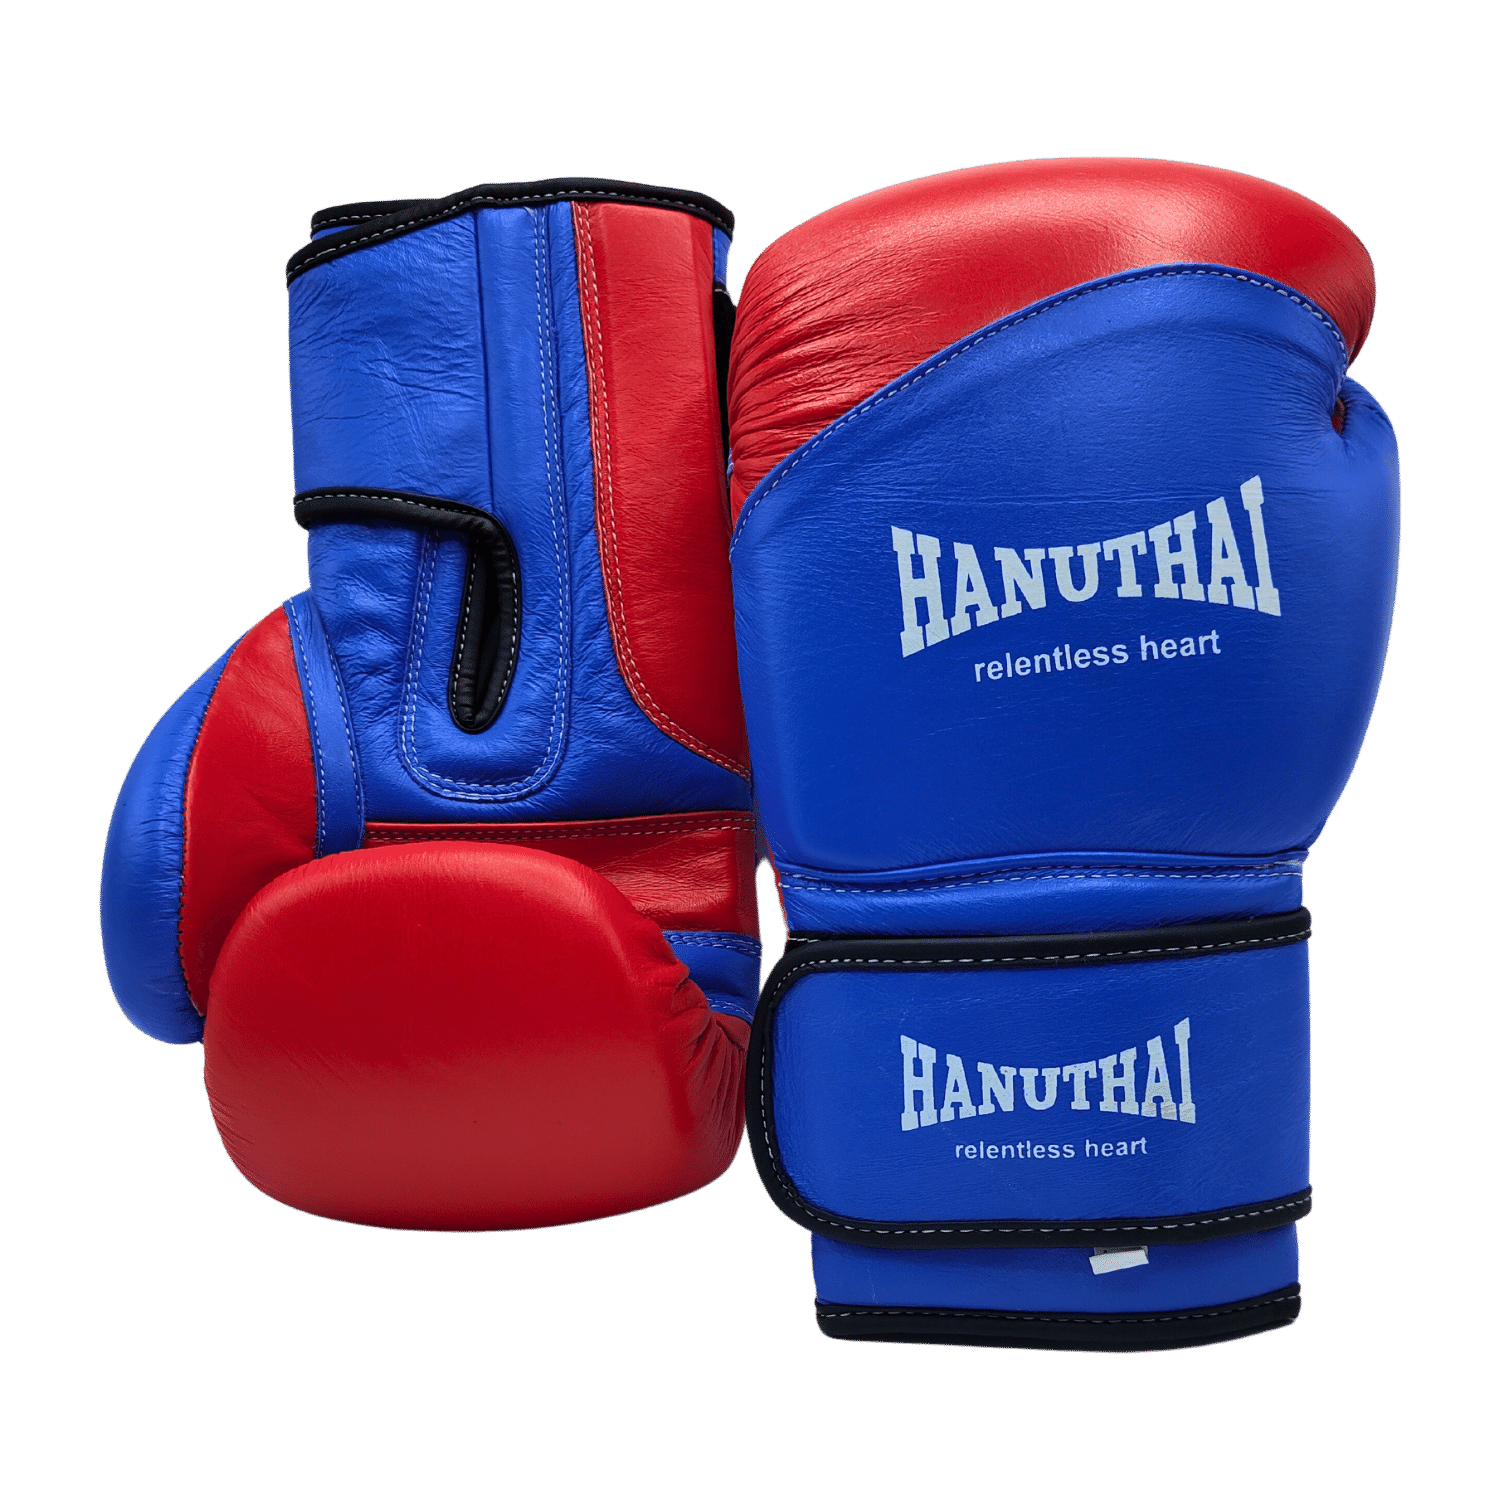 A pair of Hanuthai Muay Thai boxing gloves in blue and red with the text "hanuthai relentless heart" printed on them, positioned against a green background.